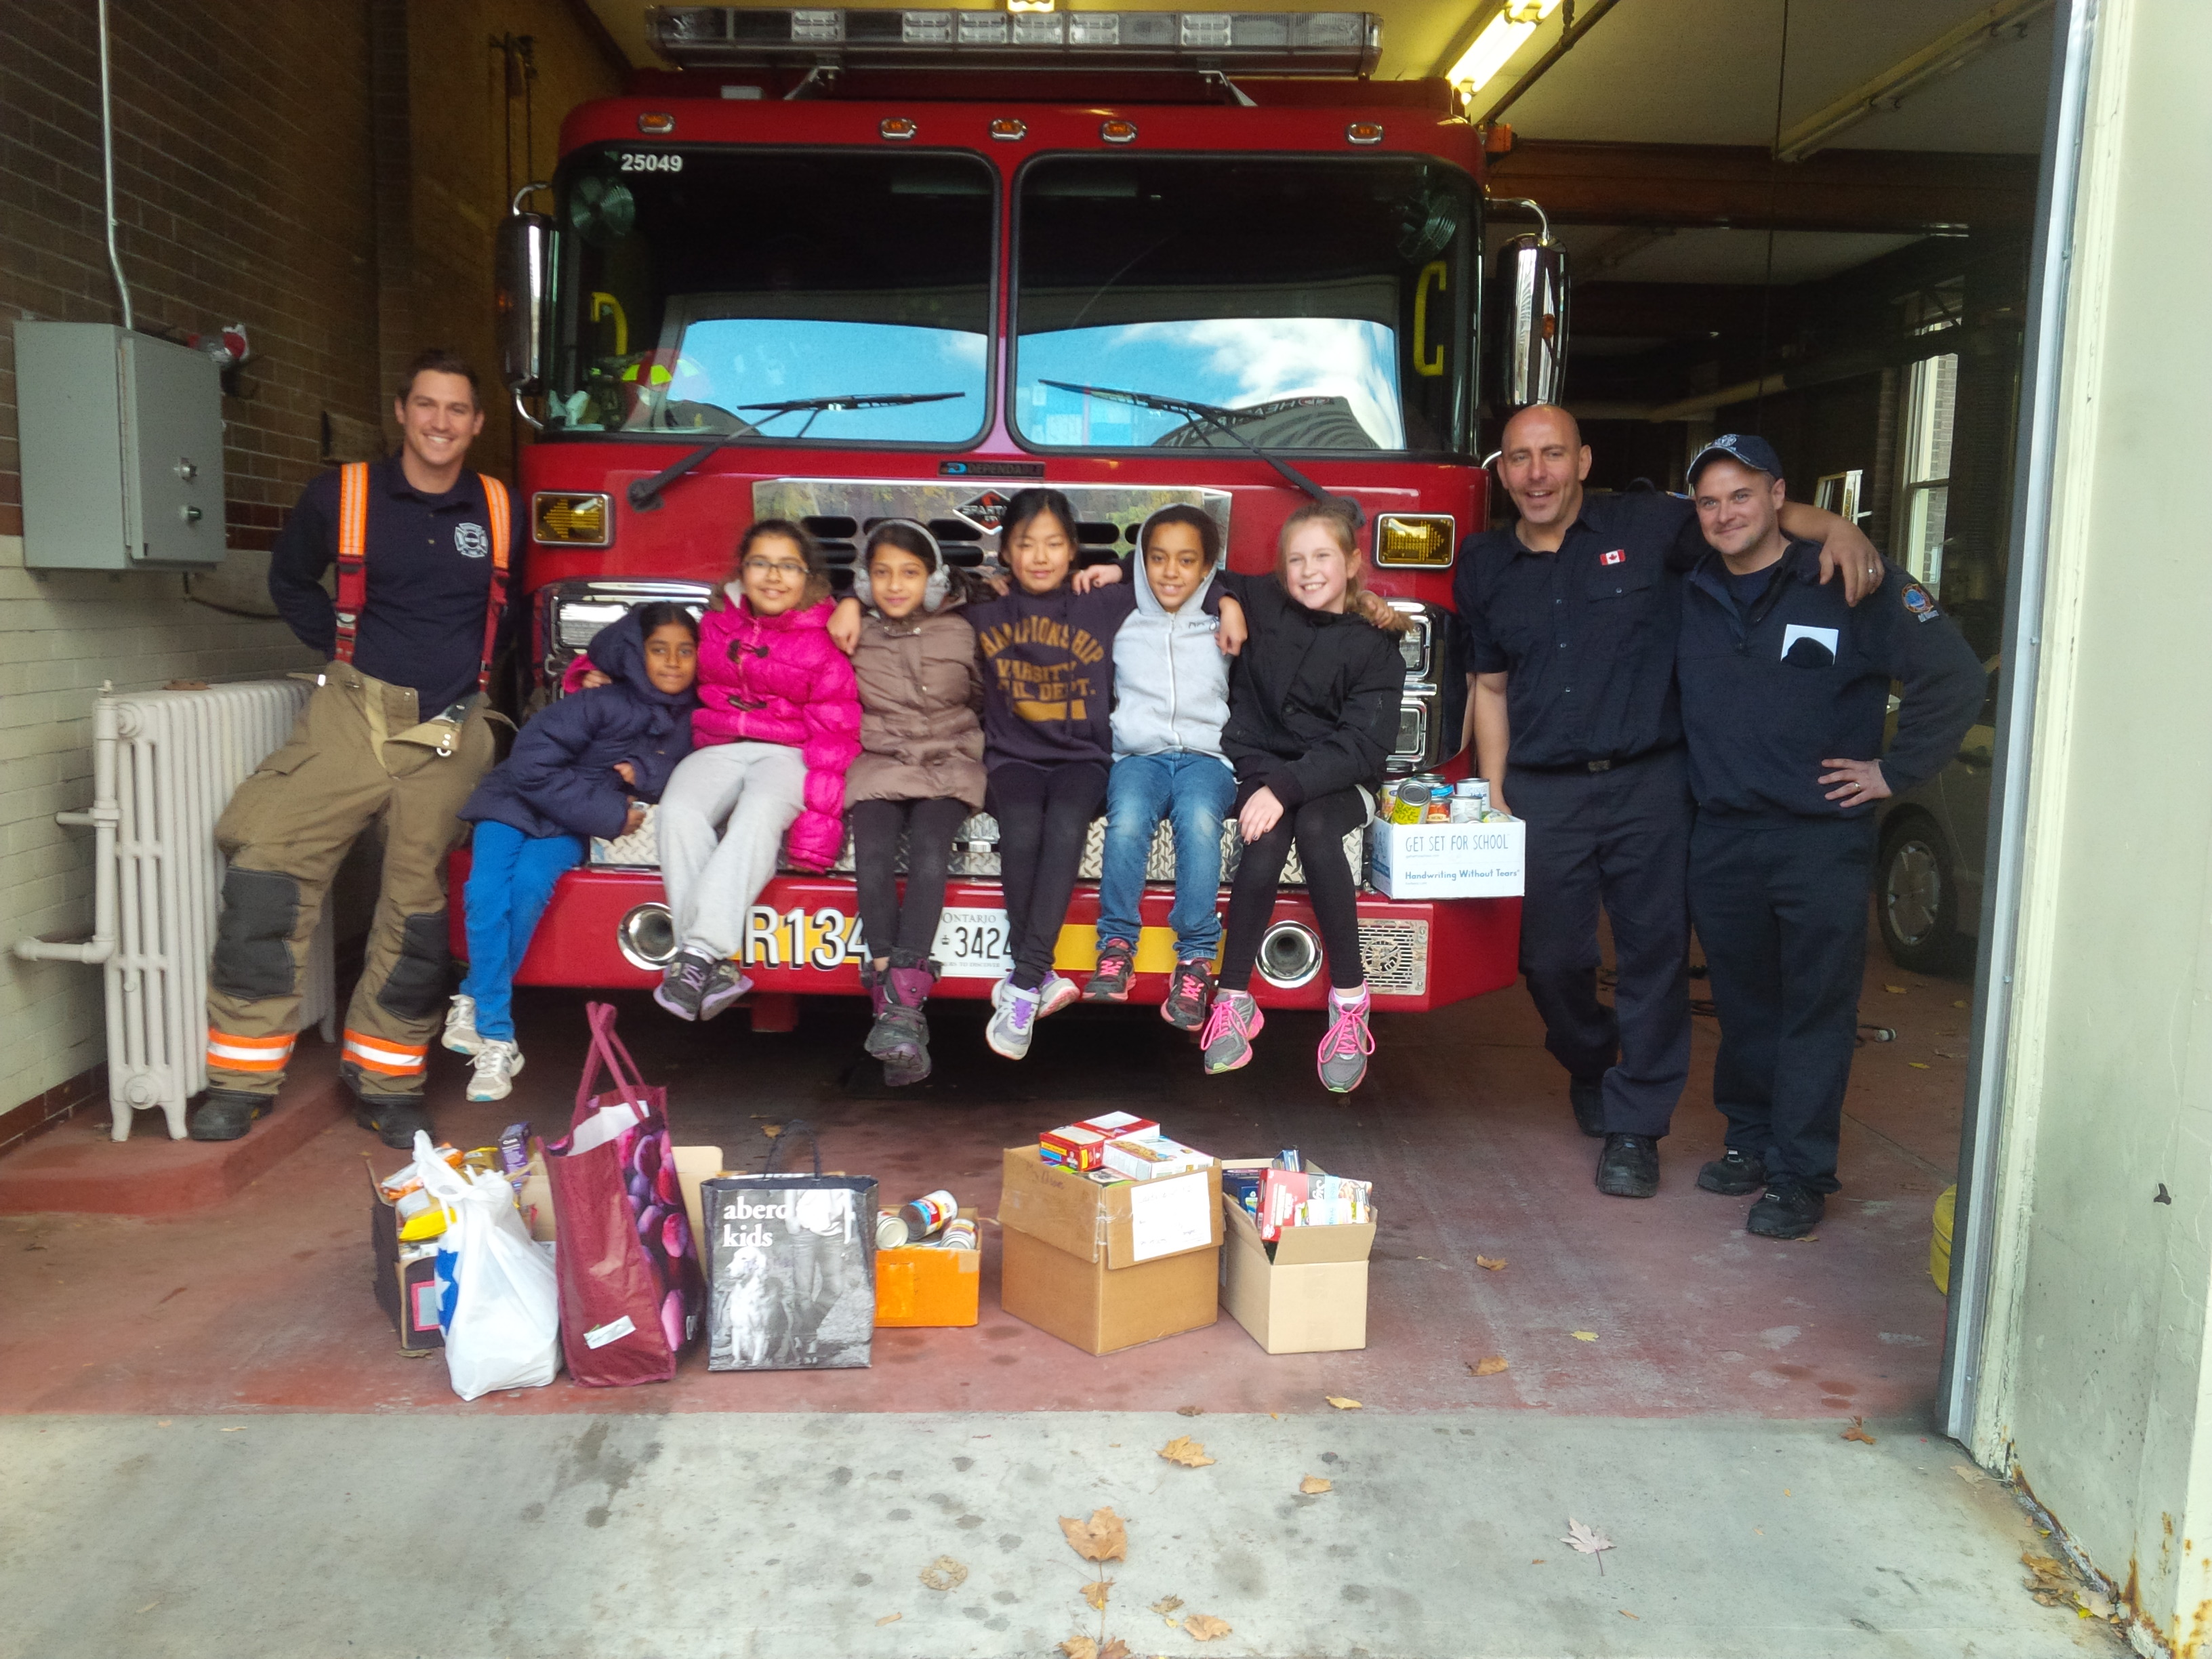 Members of the Me to We Club at the fire station with our food drive donation and the firefighters.